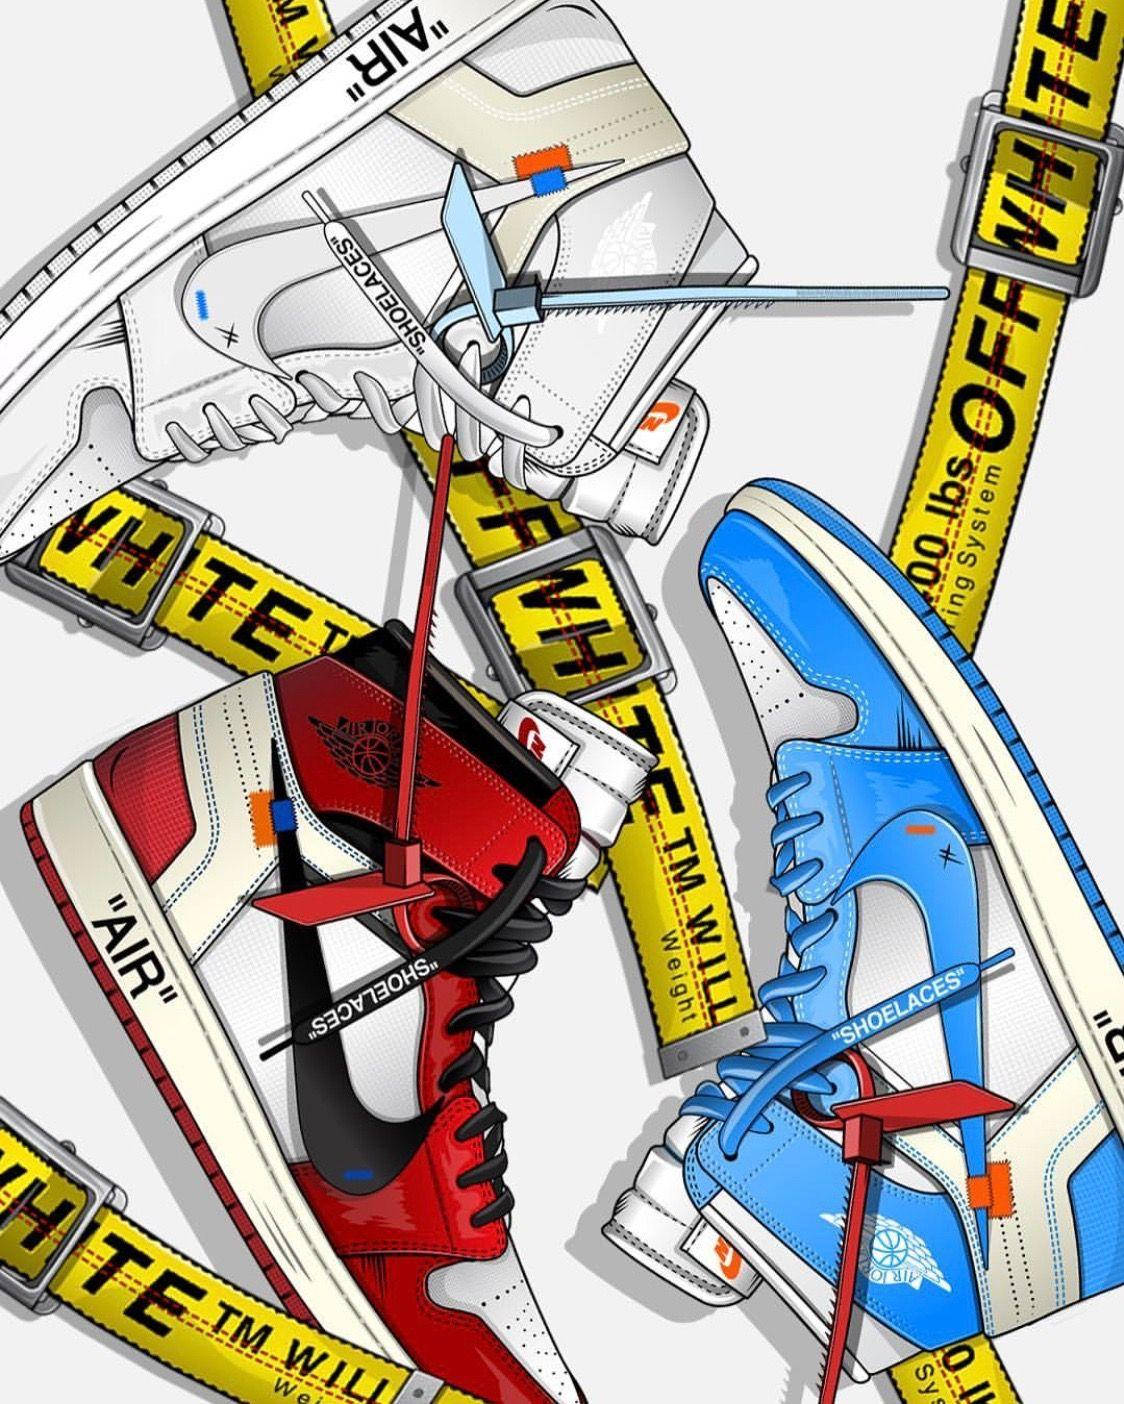 Off White 1124X1404 Wallpaper and Background Image